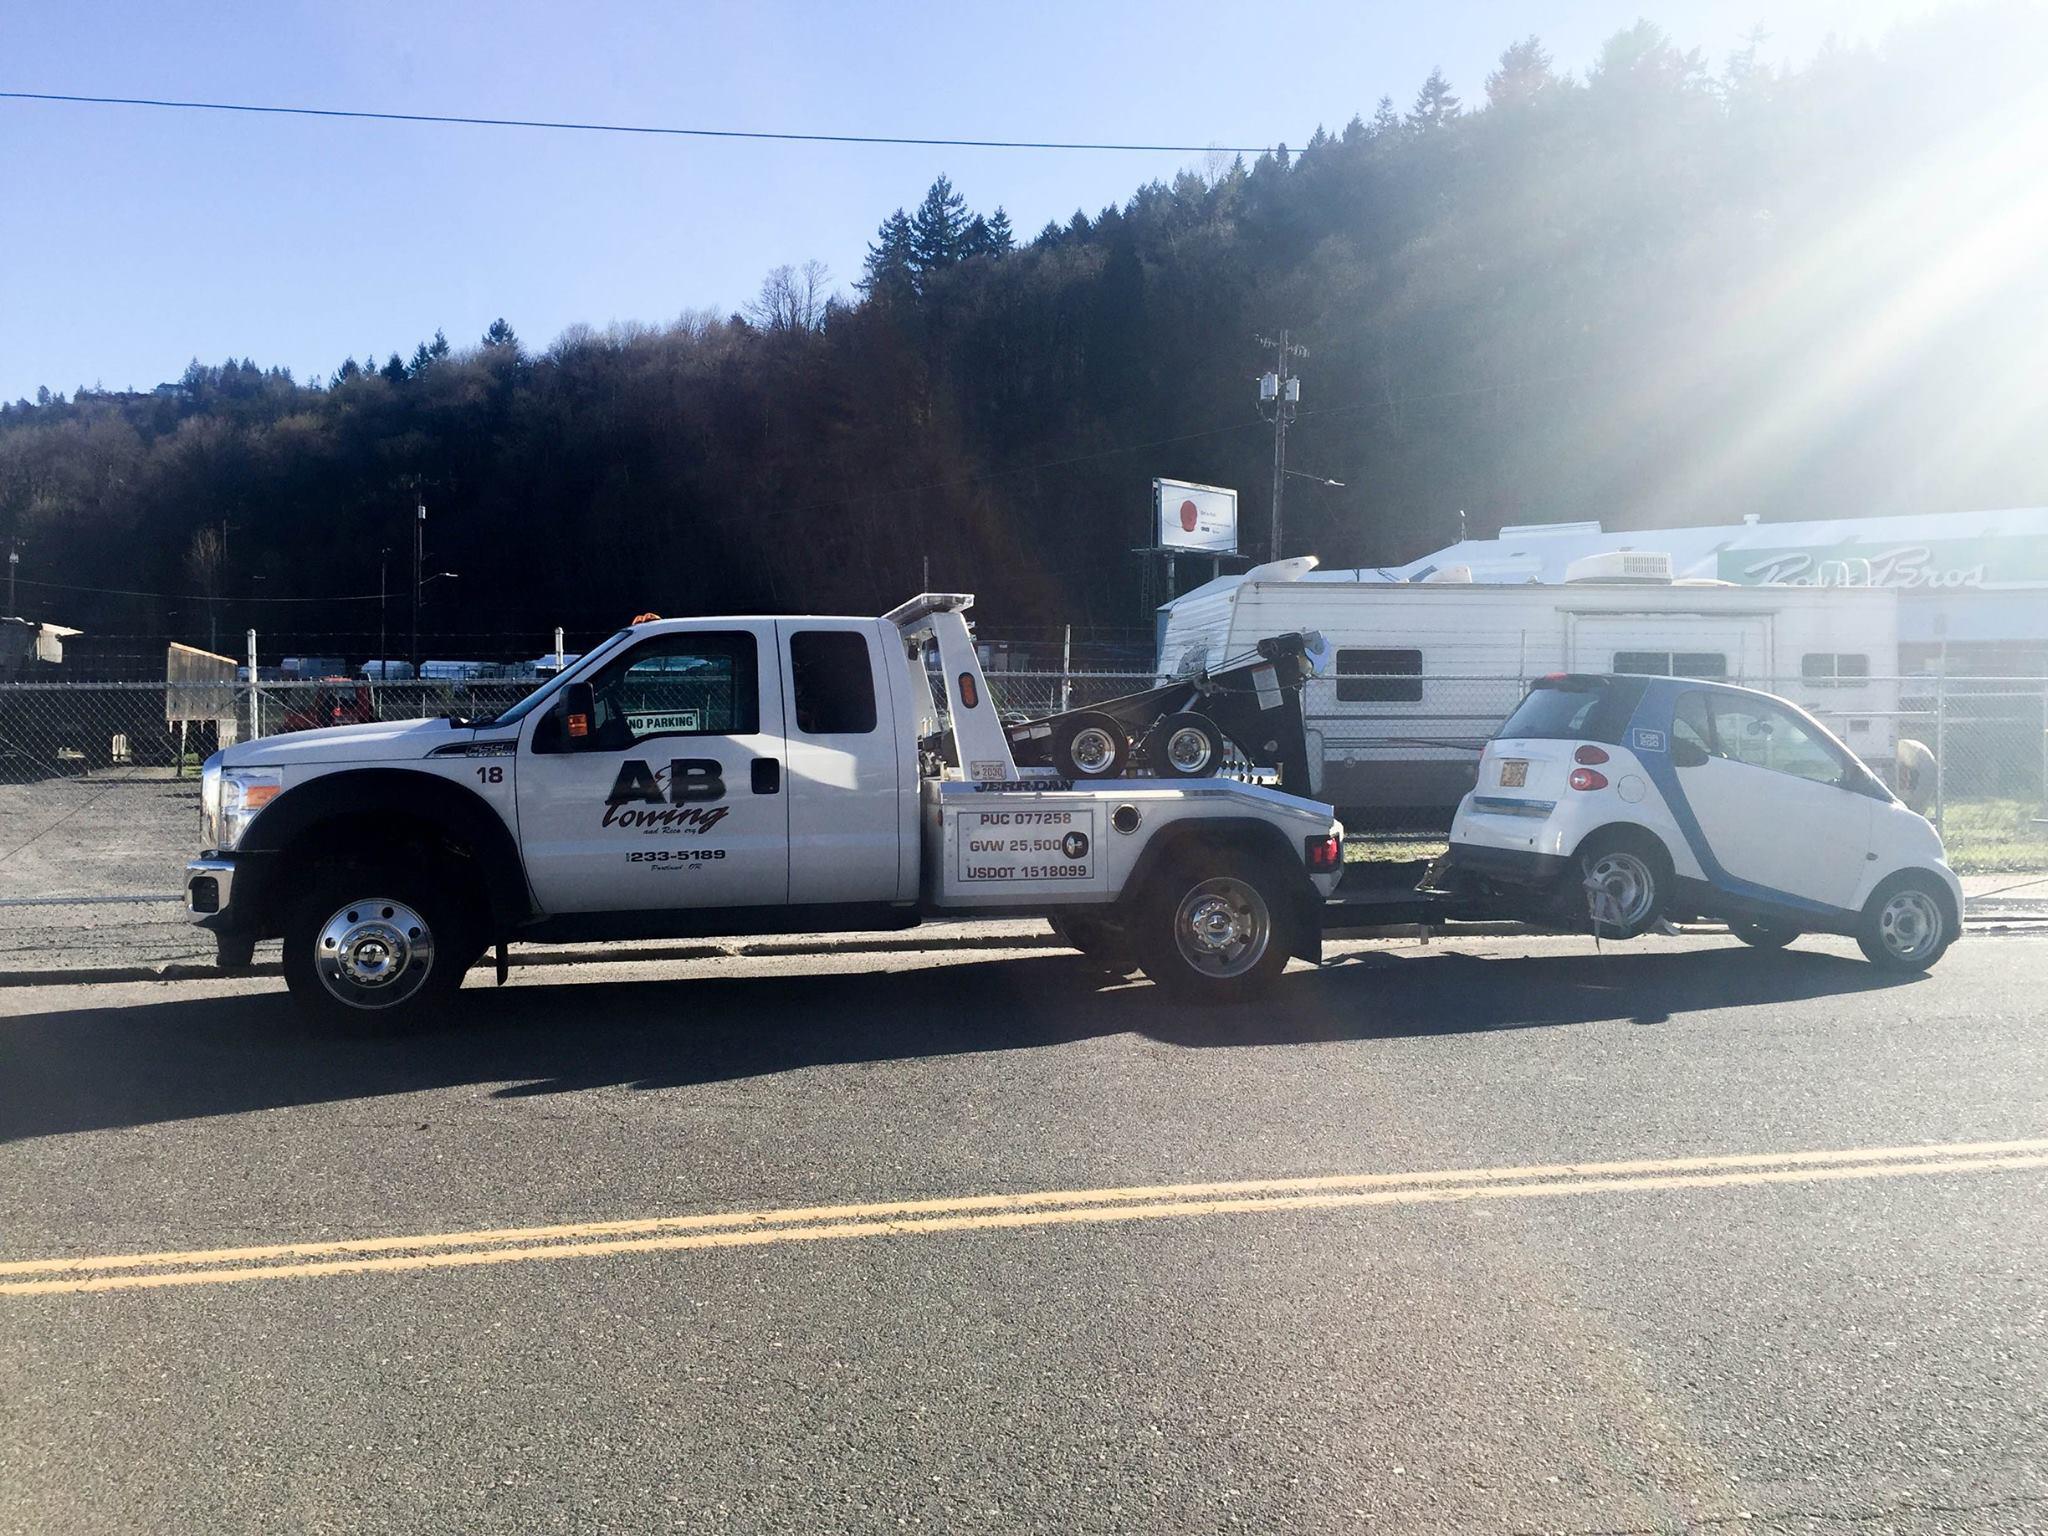 Providing expert car towing and roadside service! A&B Towing & Recovery Portland (503)233-5189